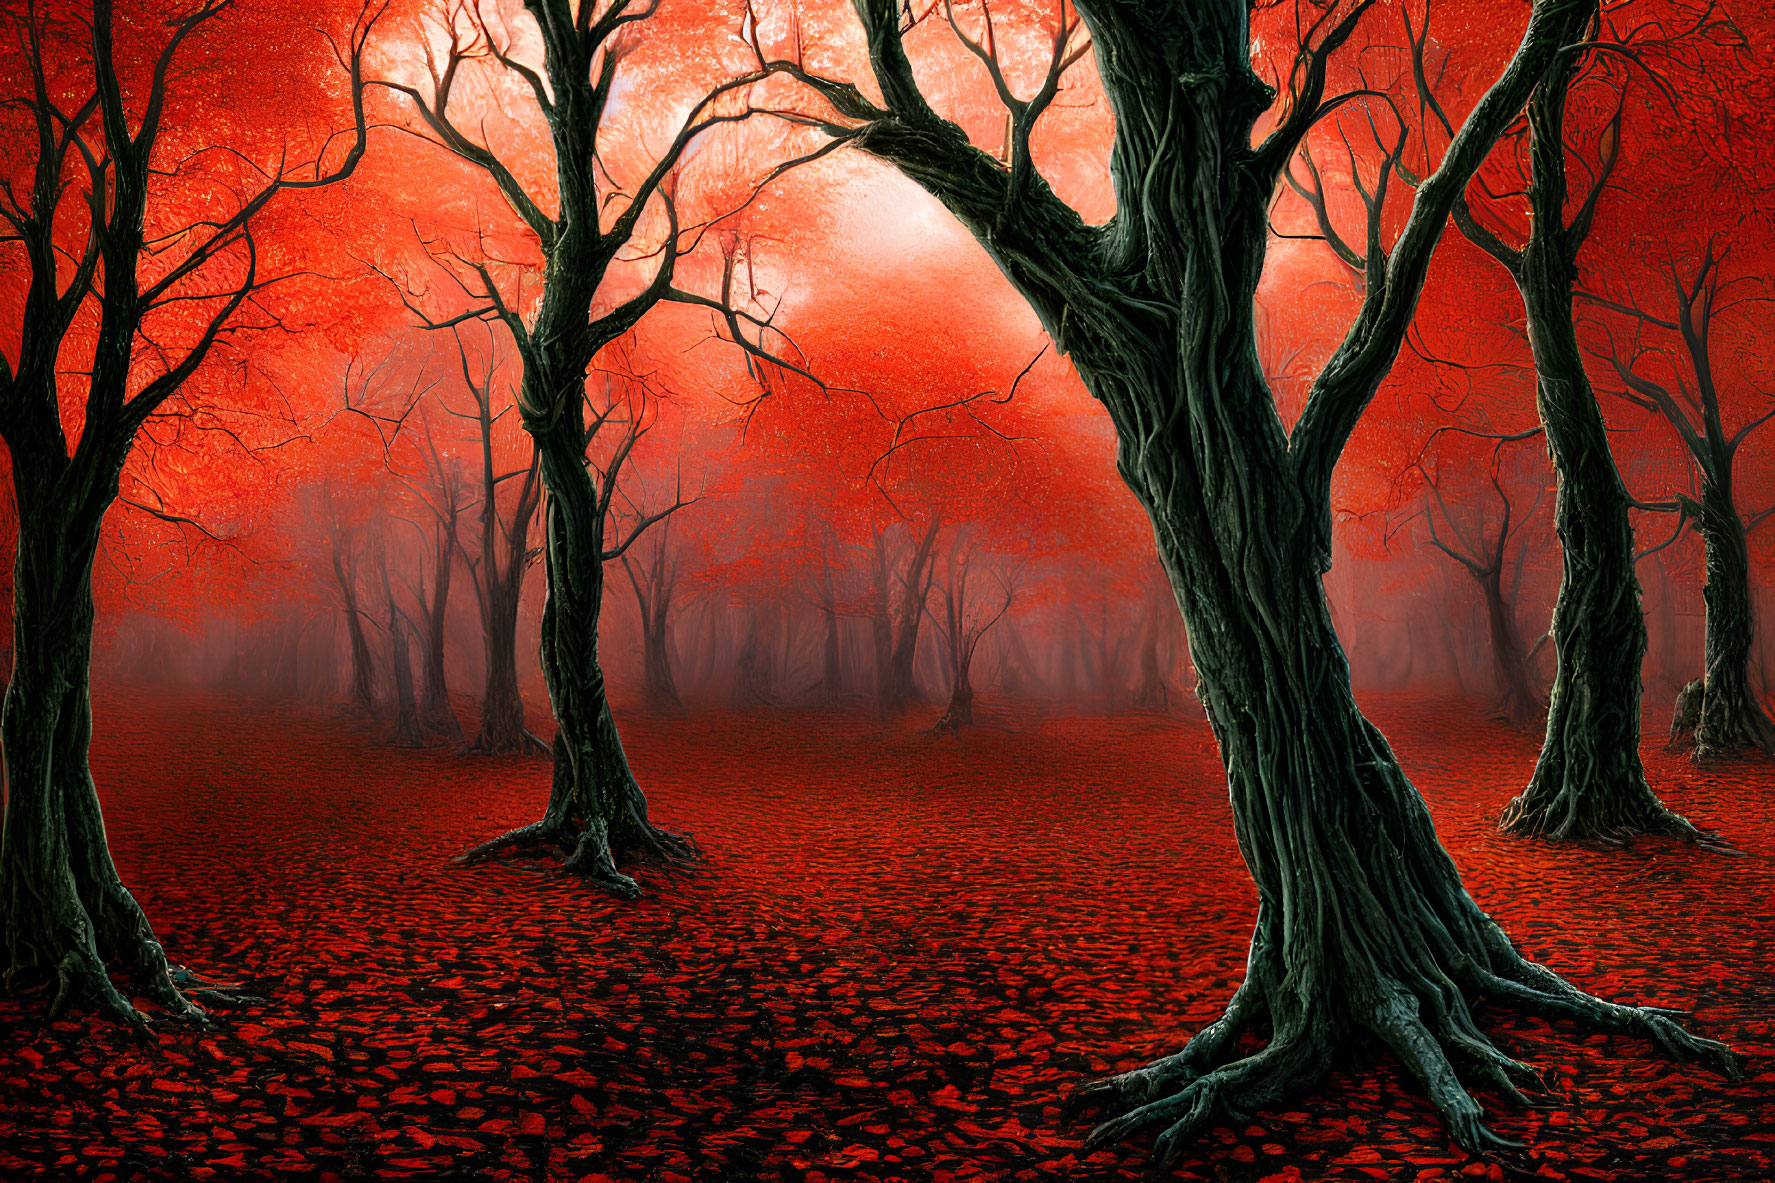 Twisted red forest with fallen leaves and glowing backdrop